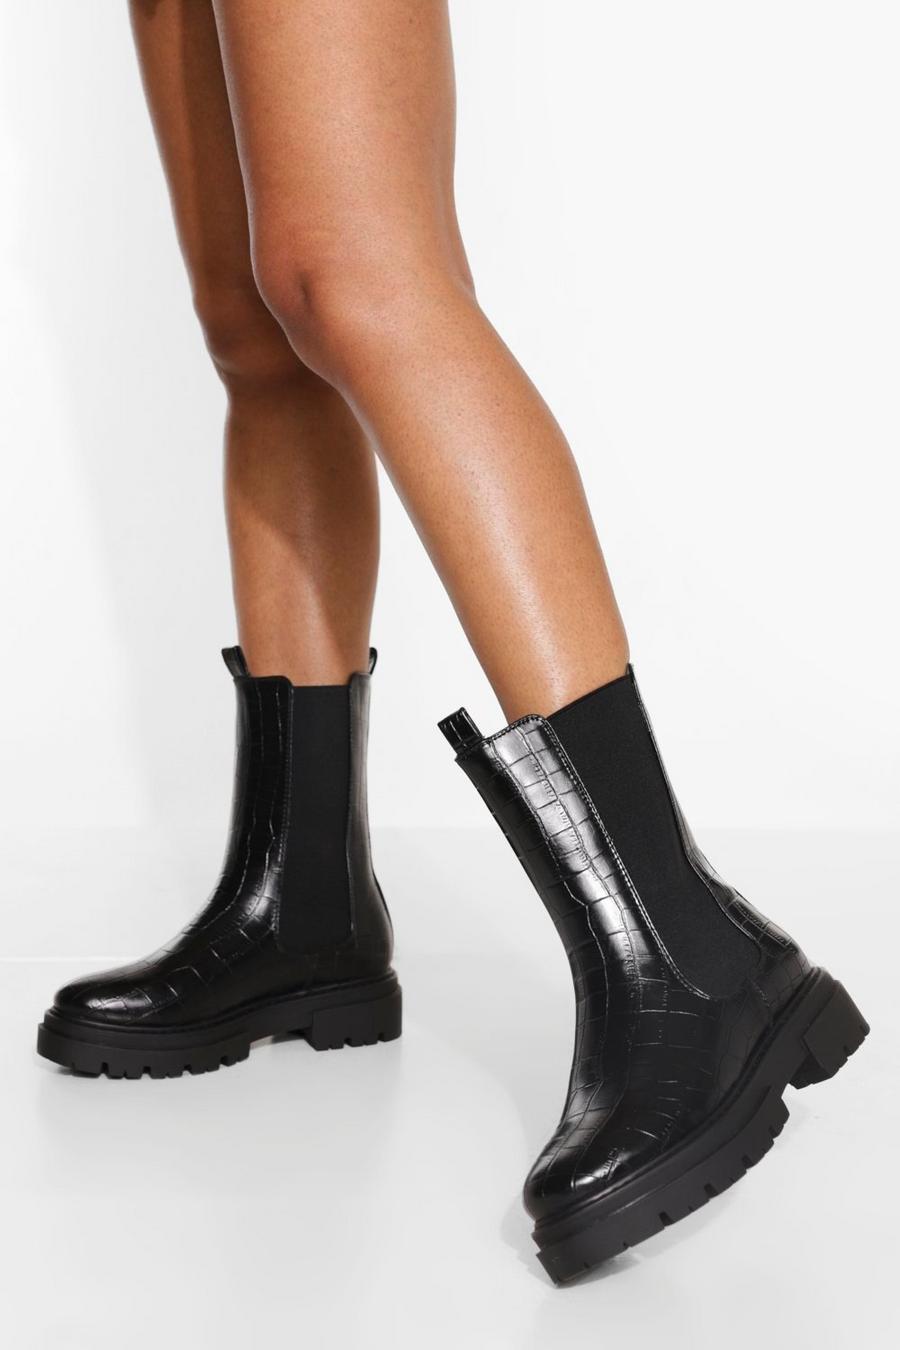 Black Wide Fit Croc Chunky Calf High Chelsea Boots image number 1